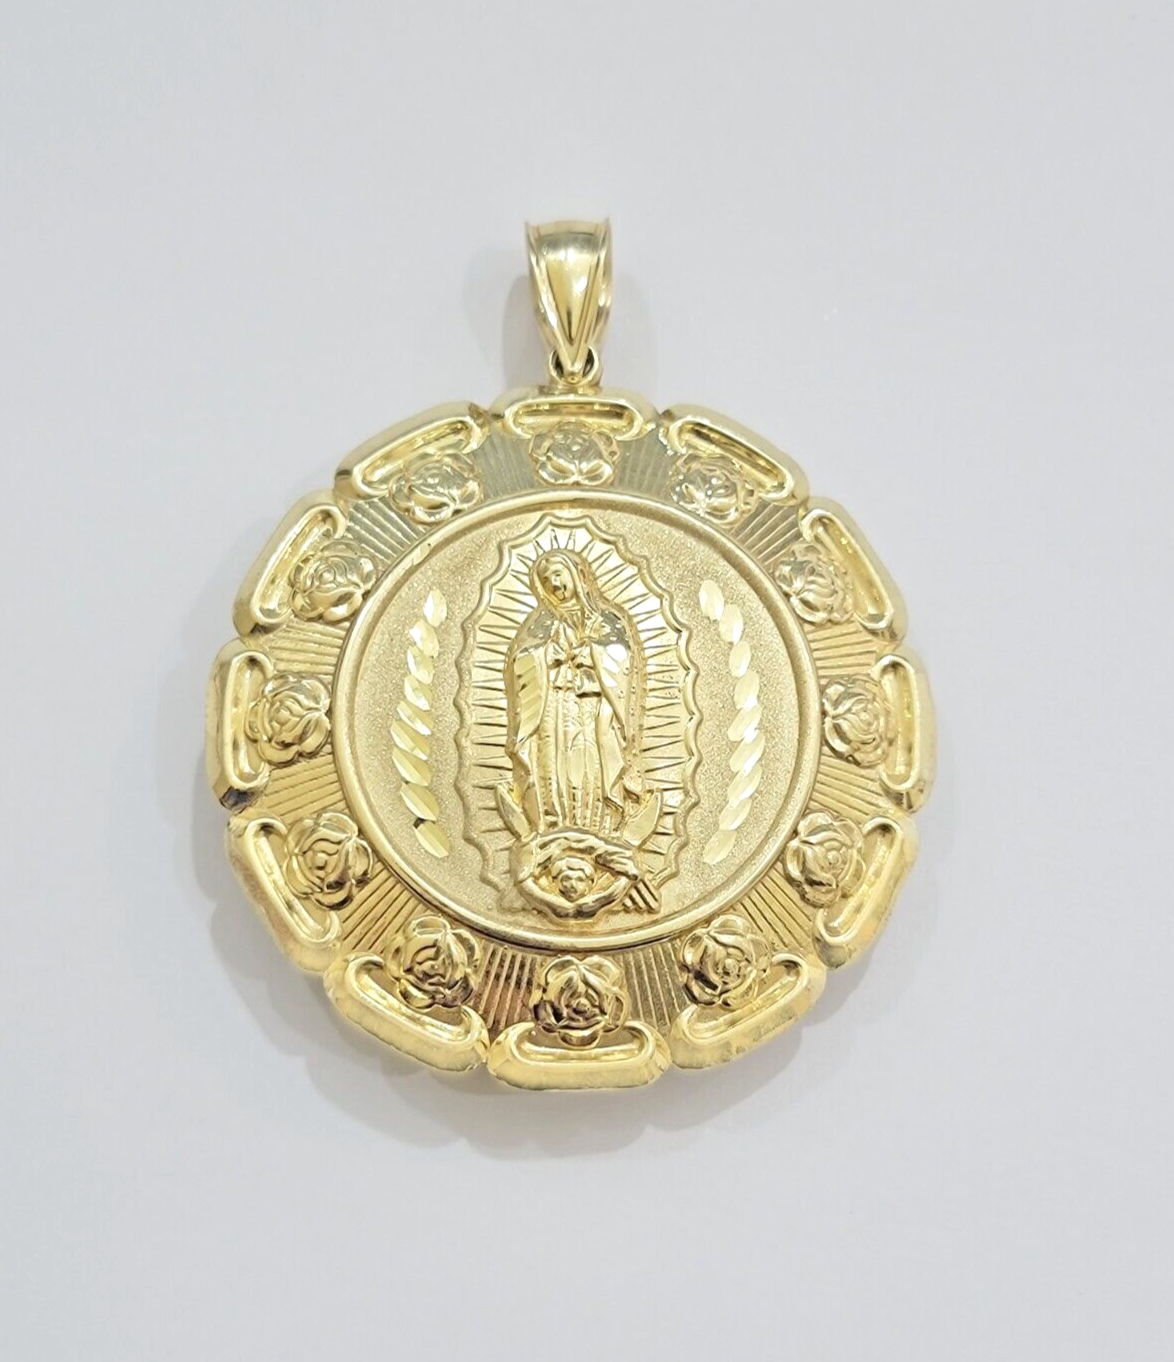 Jesus Virgin Mary Charm Pendant Real 10k Yellow Gold For 10kt Chain Necklace New